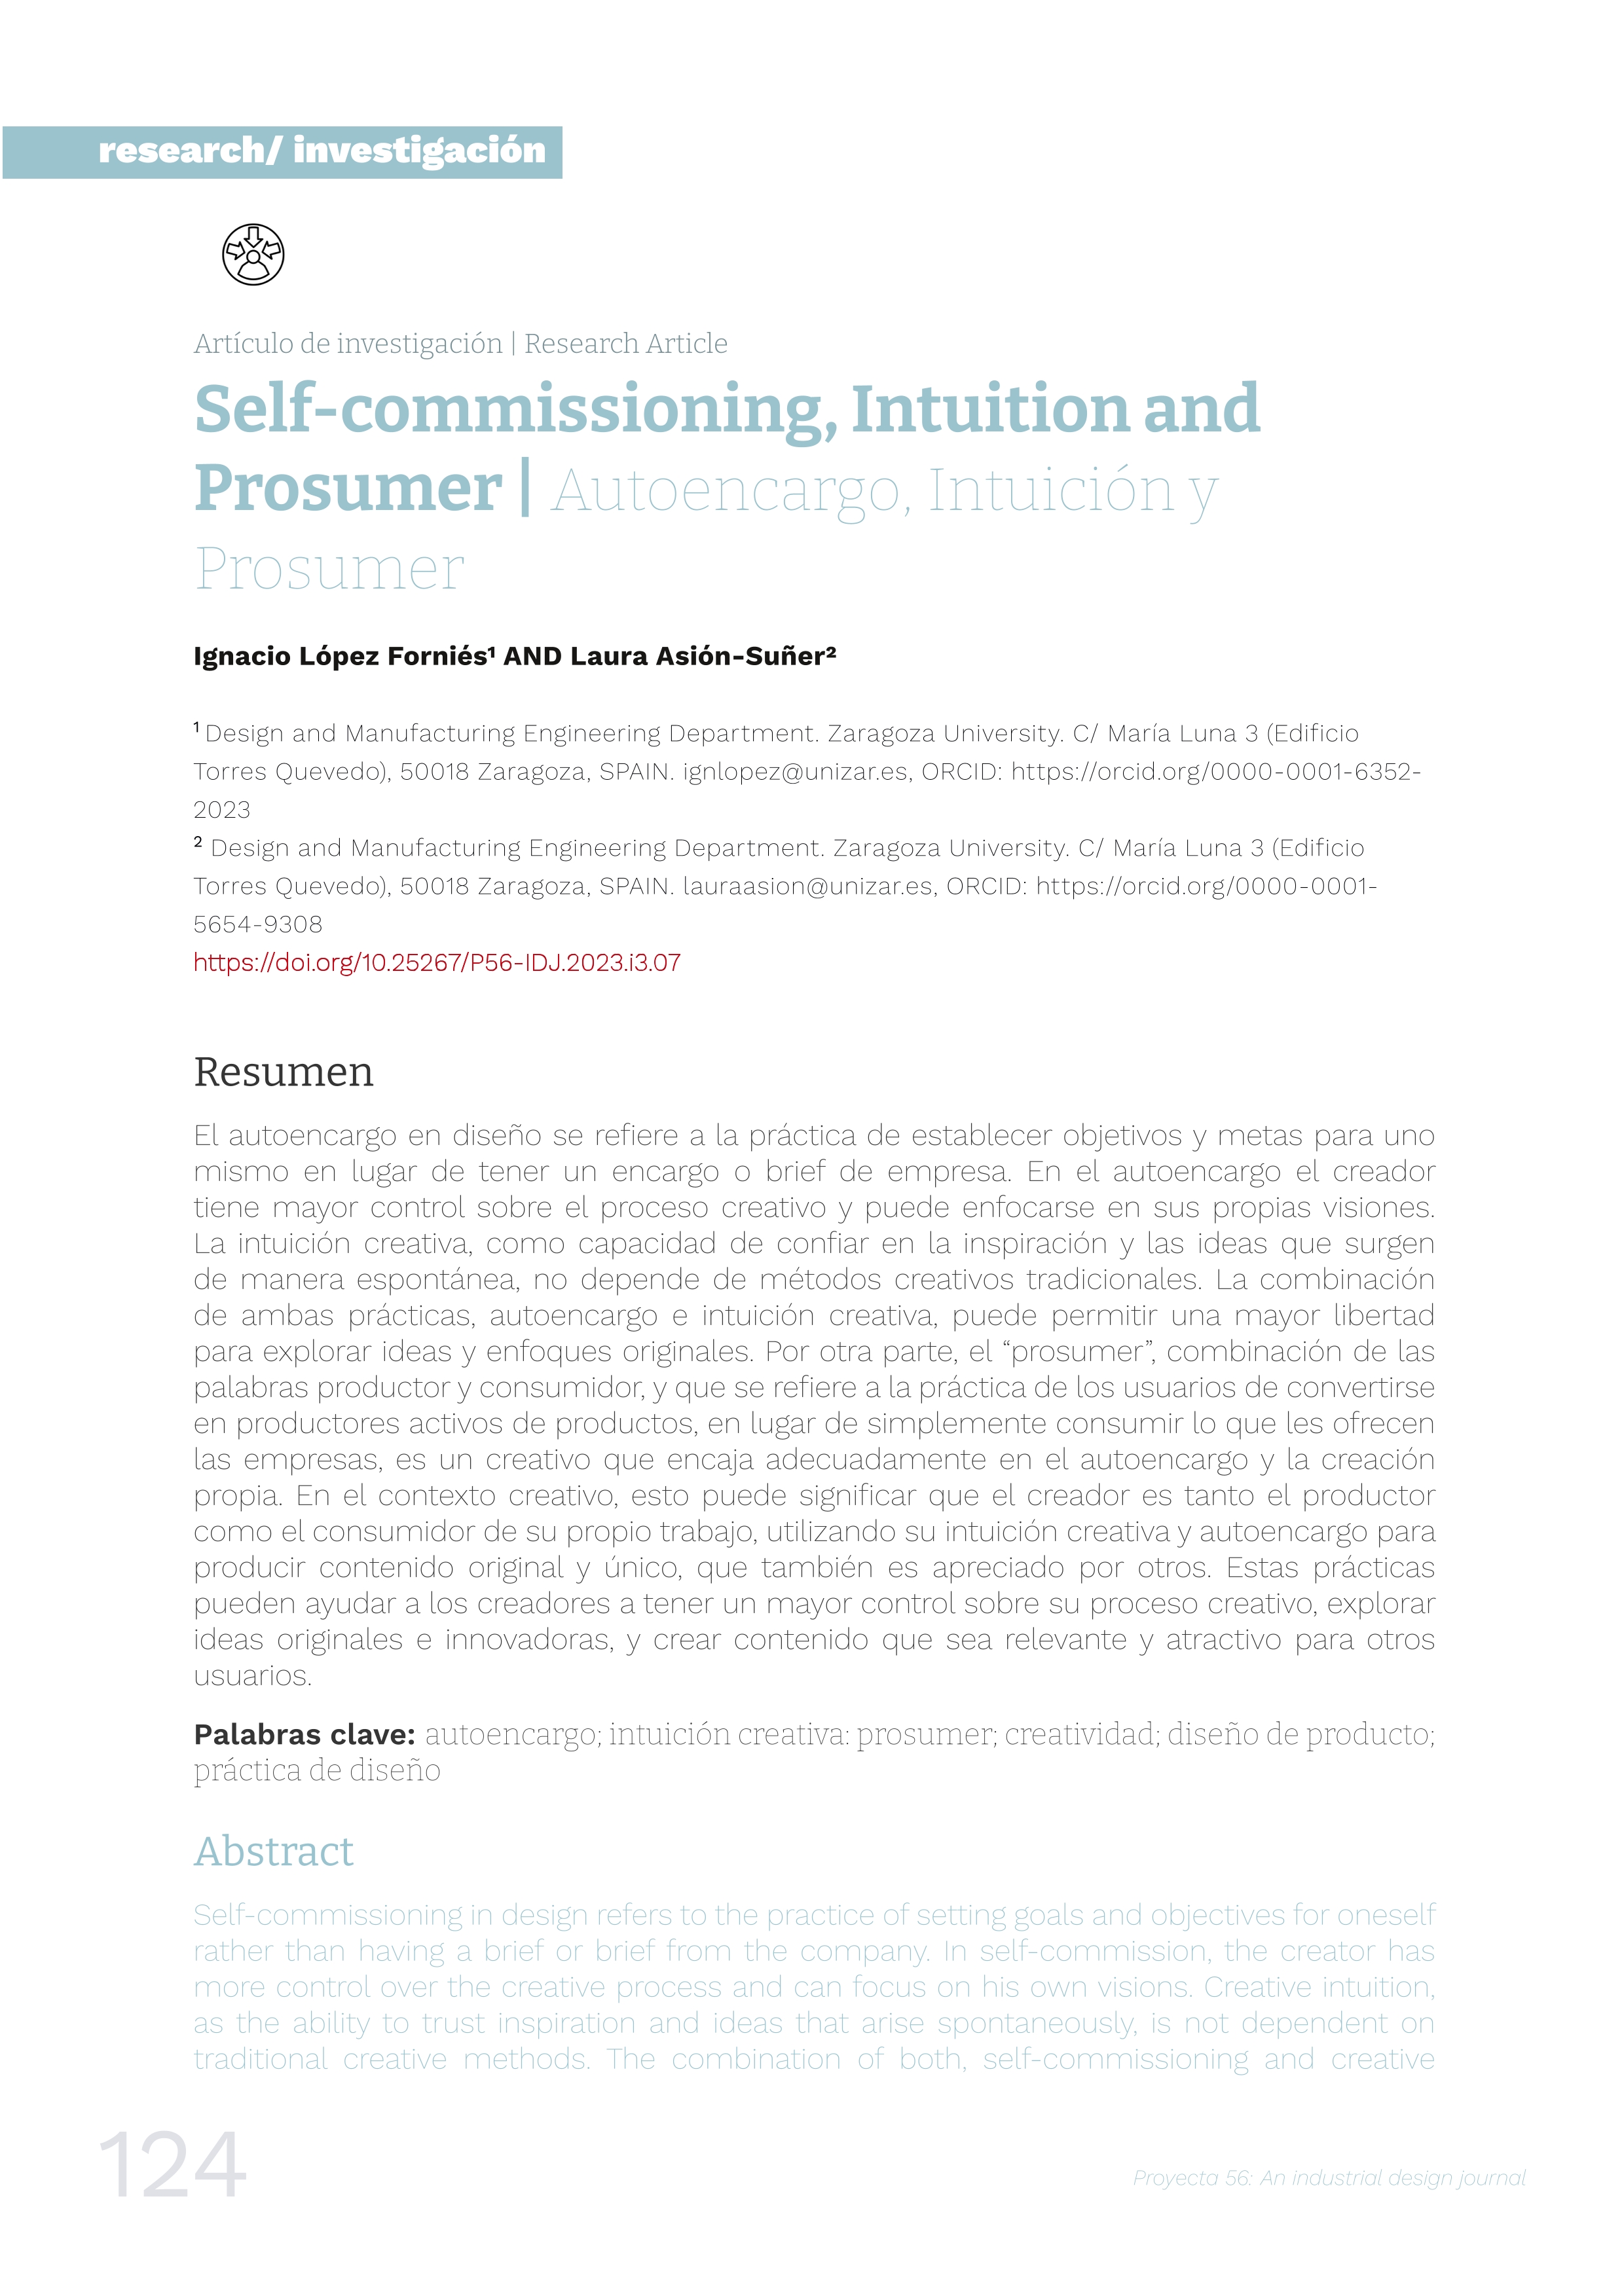 Self-commissioning, intuition and prosumer